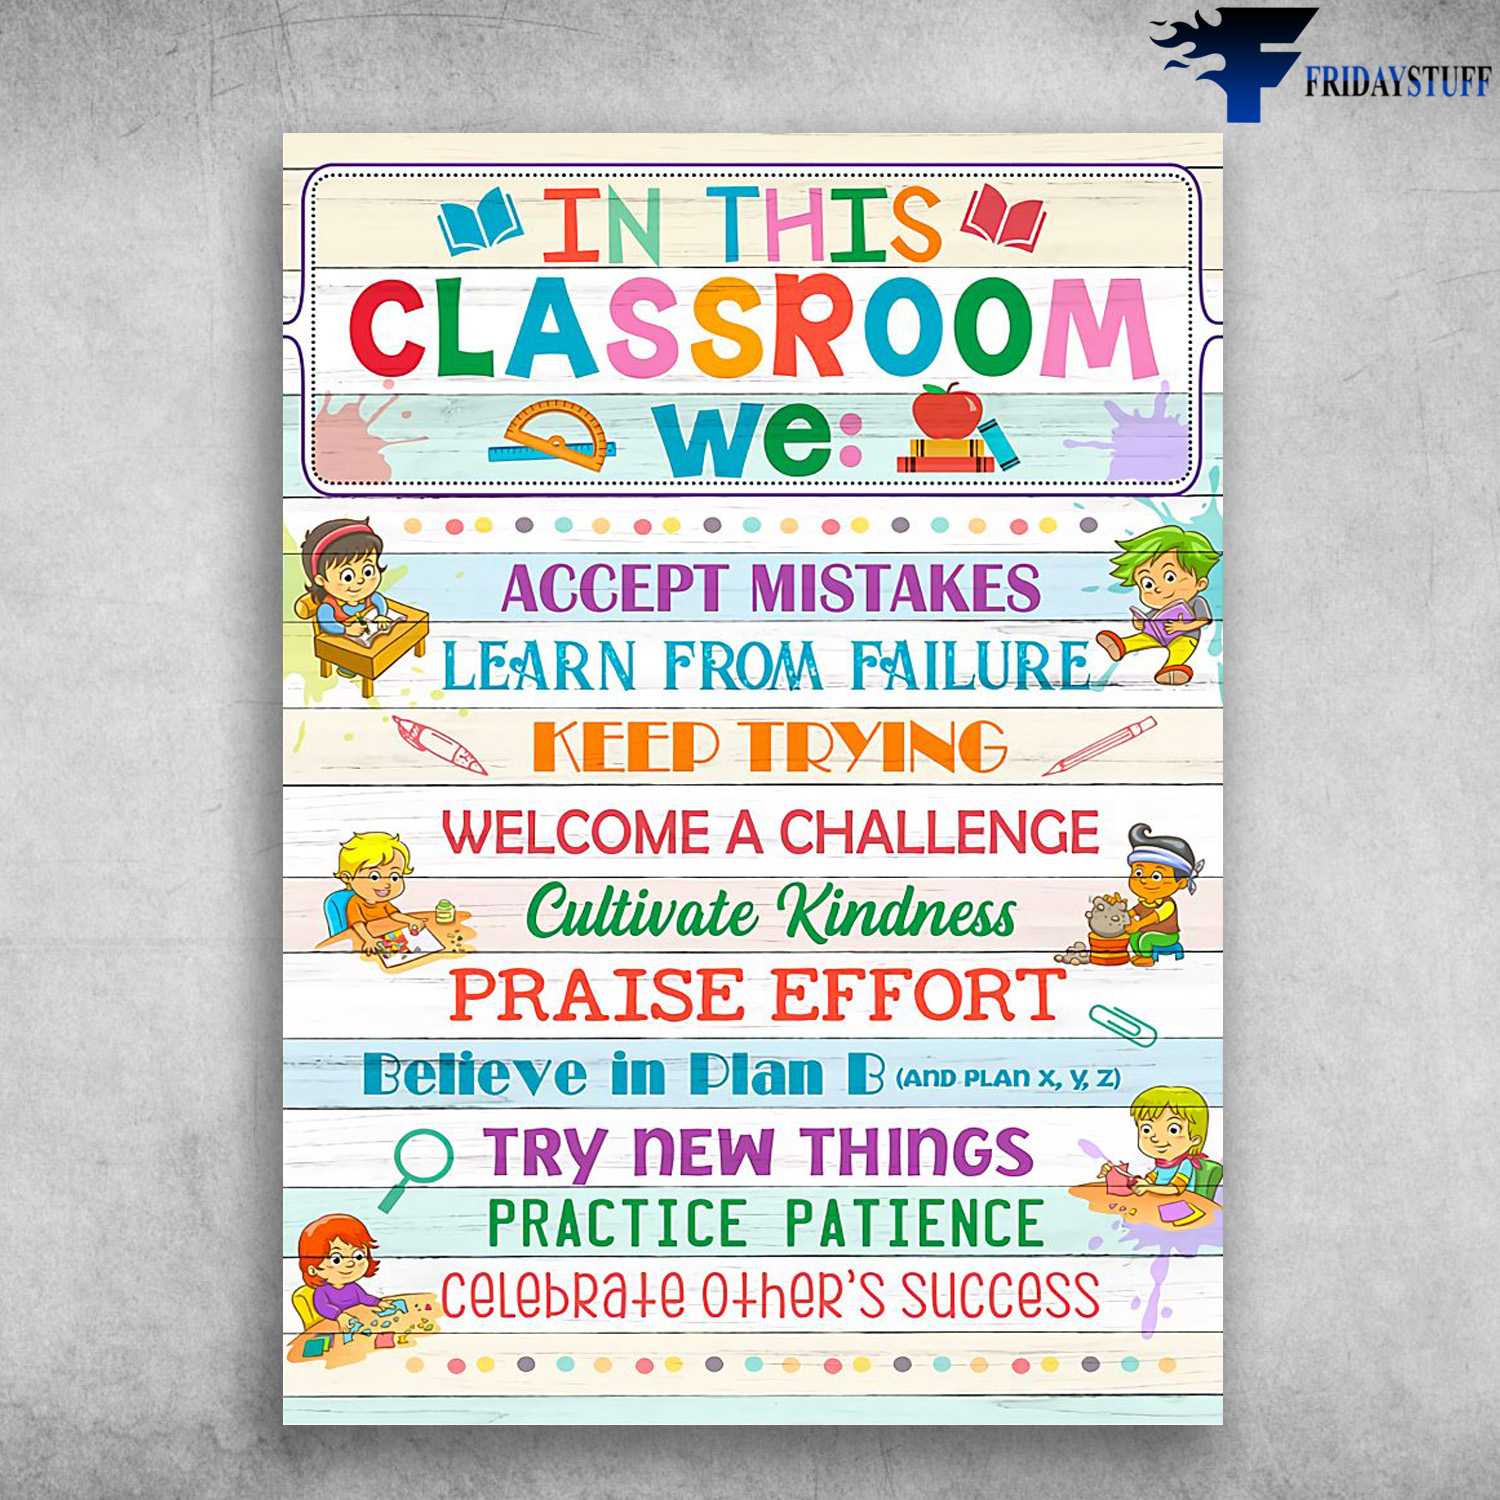 Classroom Poster, In This Classroom, We Accept Mistakes, Learn From Failure, Keep Trying, Welcome A Challenge, Cultivate Kindness, Praise Effort